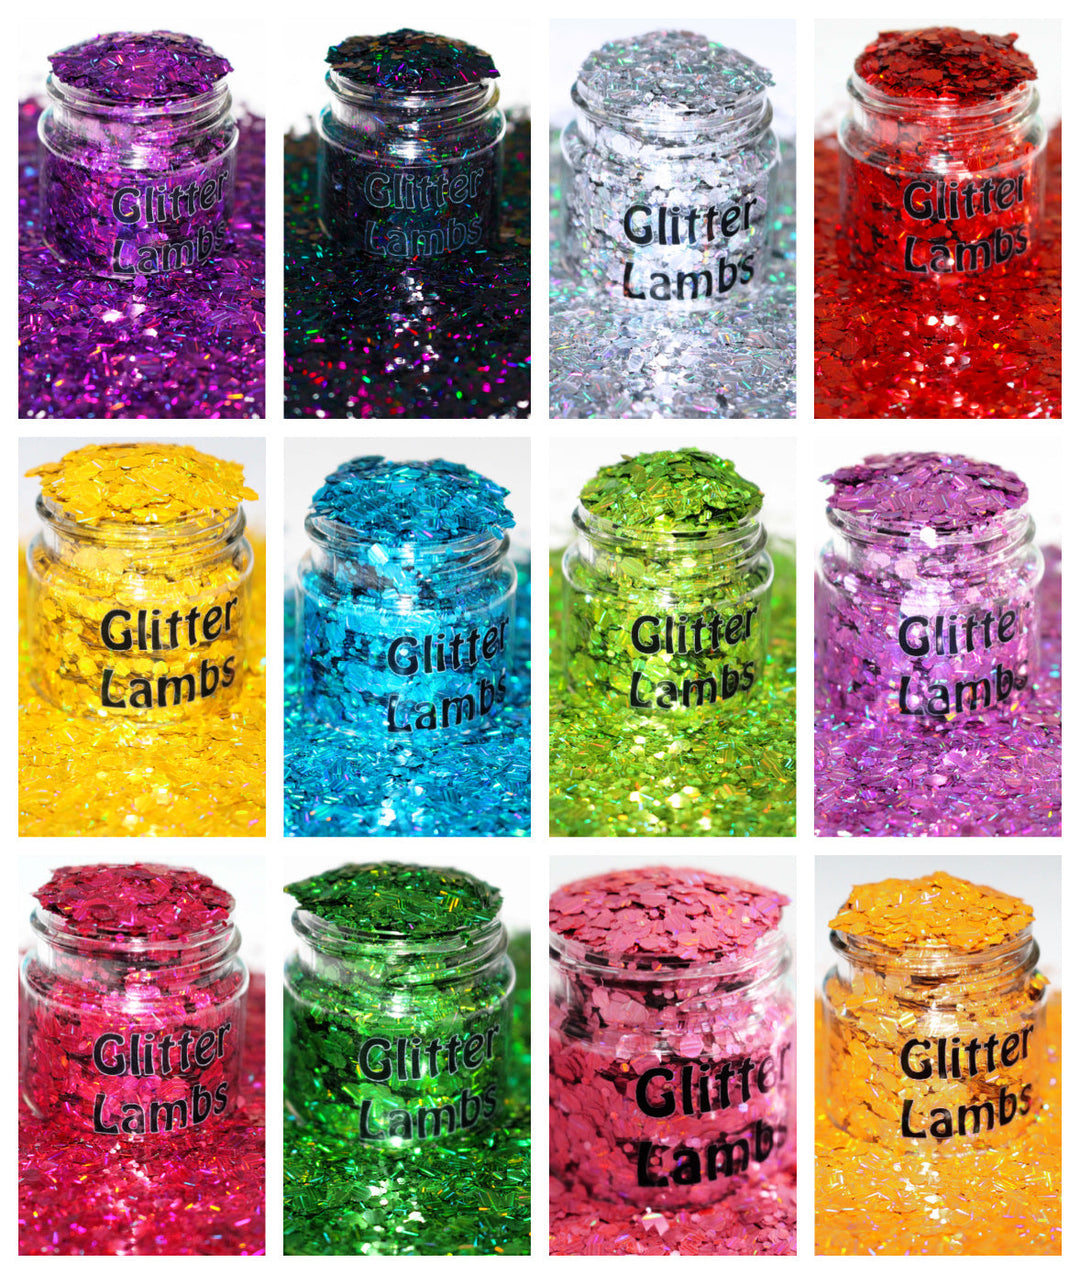 Sleeping Beauty Glitter Collection of 12 by GlitterLambs.com